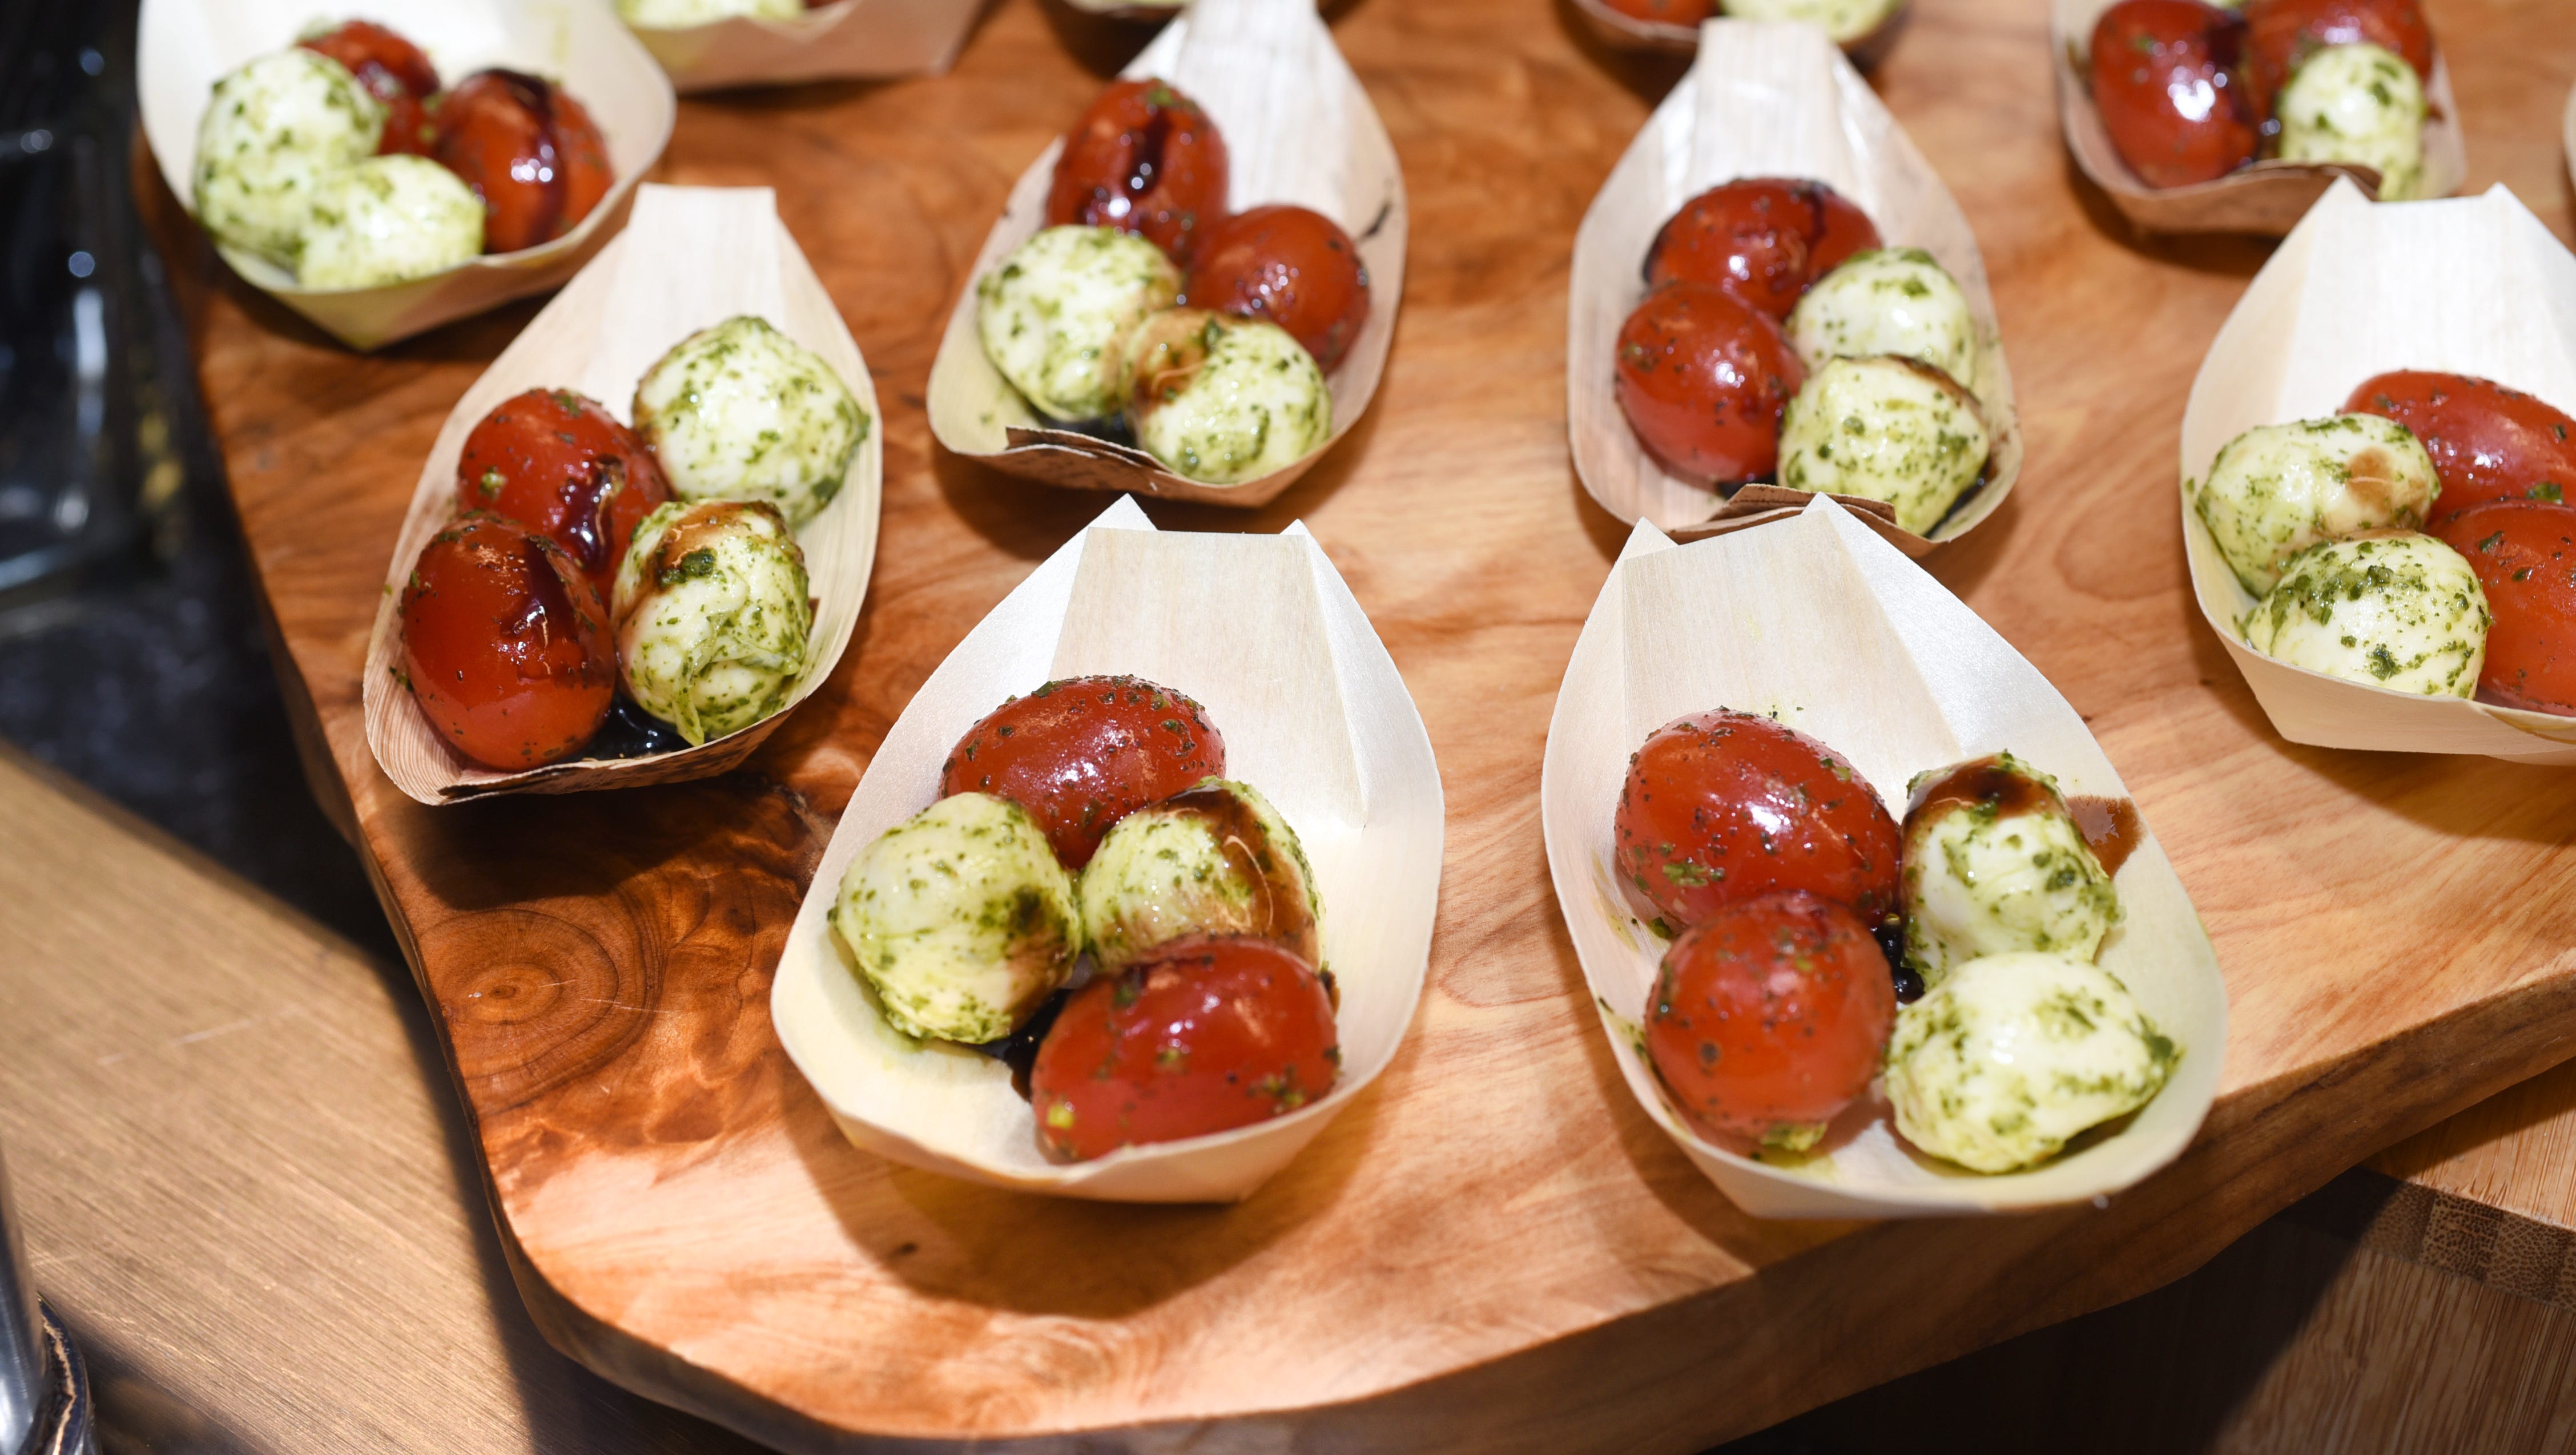 The Caprese Salad was presented during a media event unveiling concessions at Comerica Park.